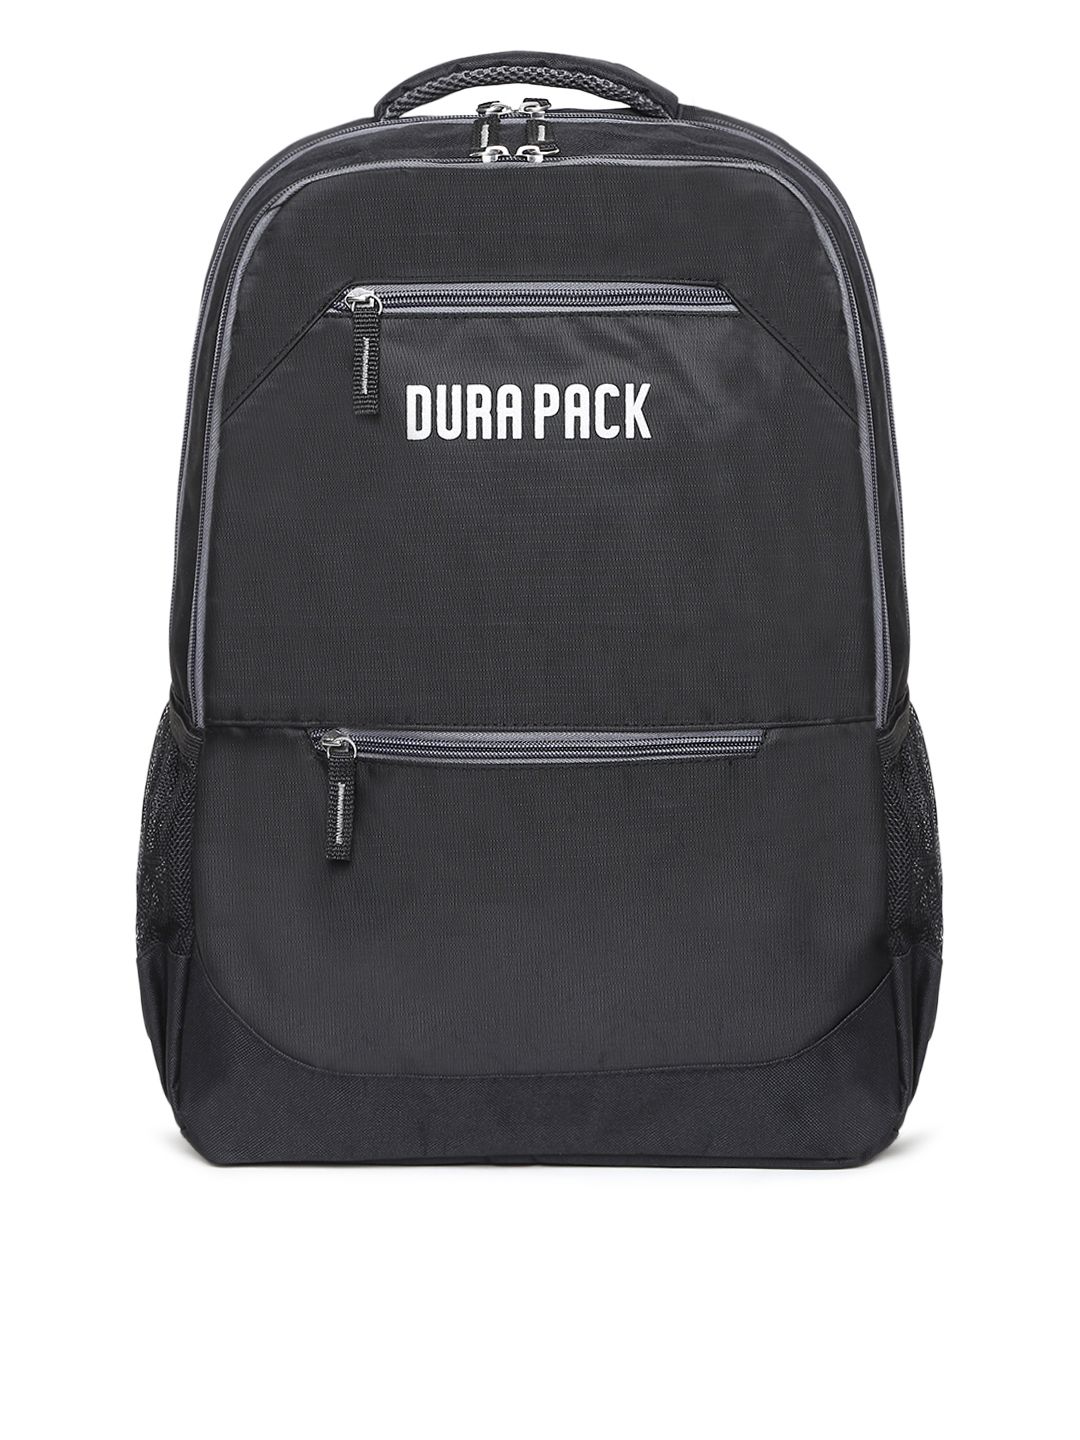 Durapack Unisex Black 15-Inch Laptop Backpack Price in India